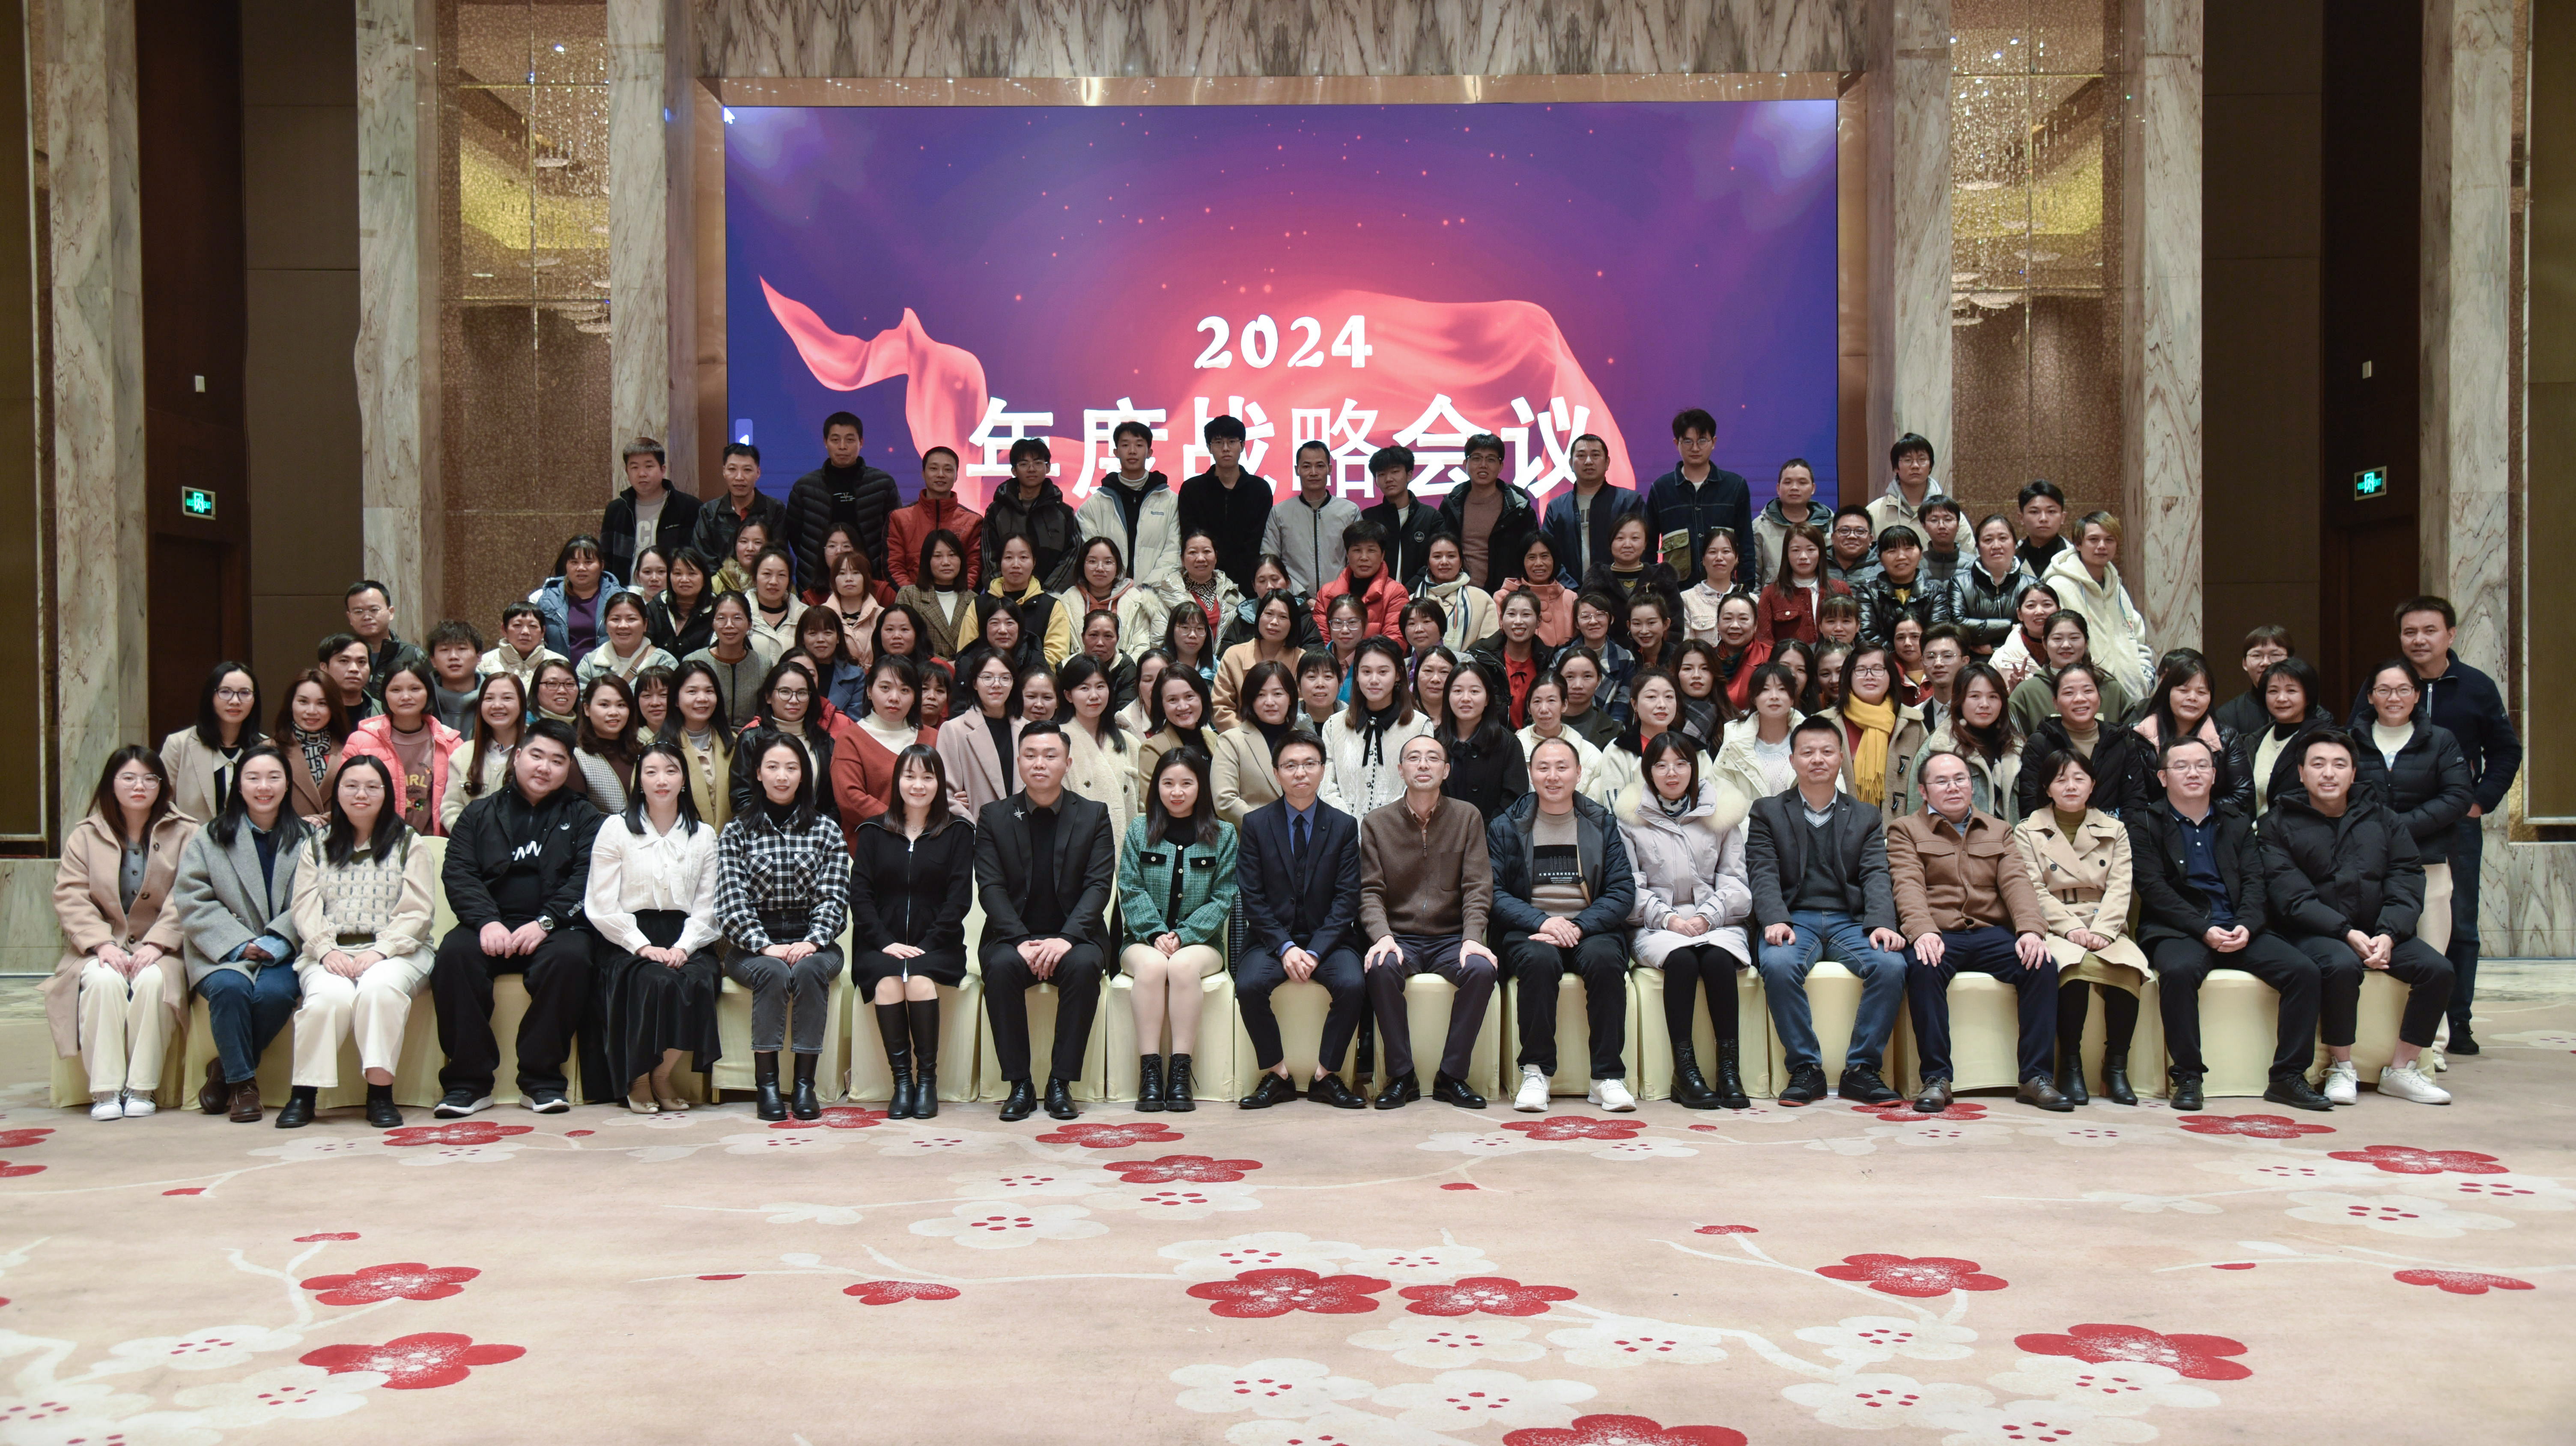 On January 27, 2024, the TXGA 2024 annual strategic meeting was grandly held. The theme of the conference is: Wisdom Integration, Achievement Sharing, and Win Win Together.